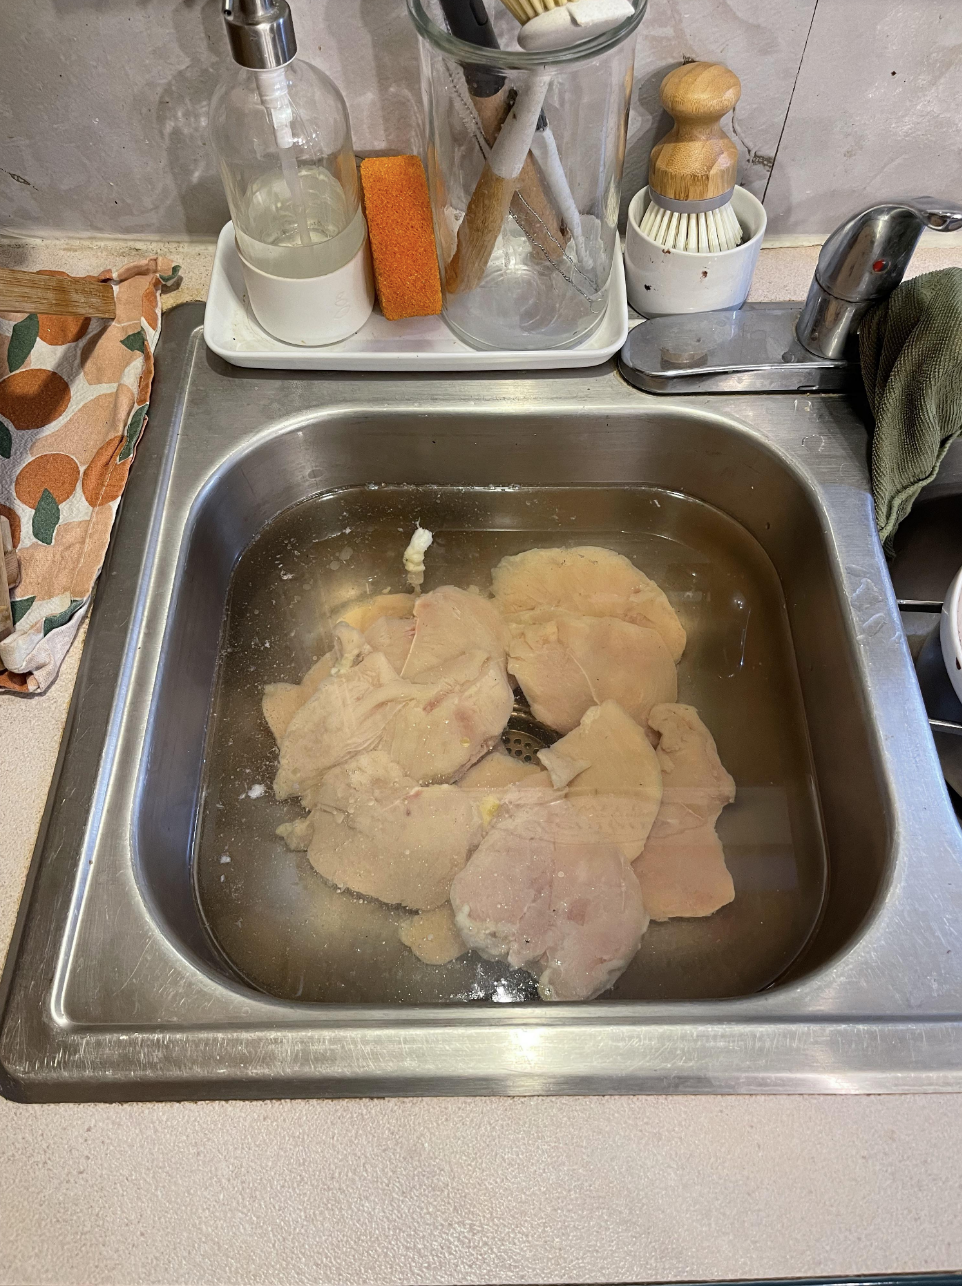 Several raw chicken thighs sit submerged in water in a sink